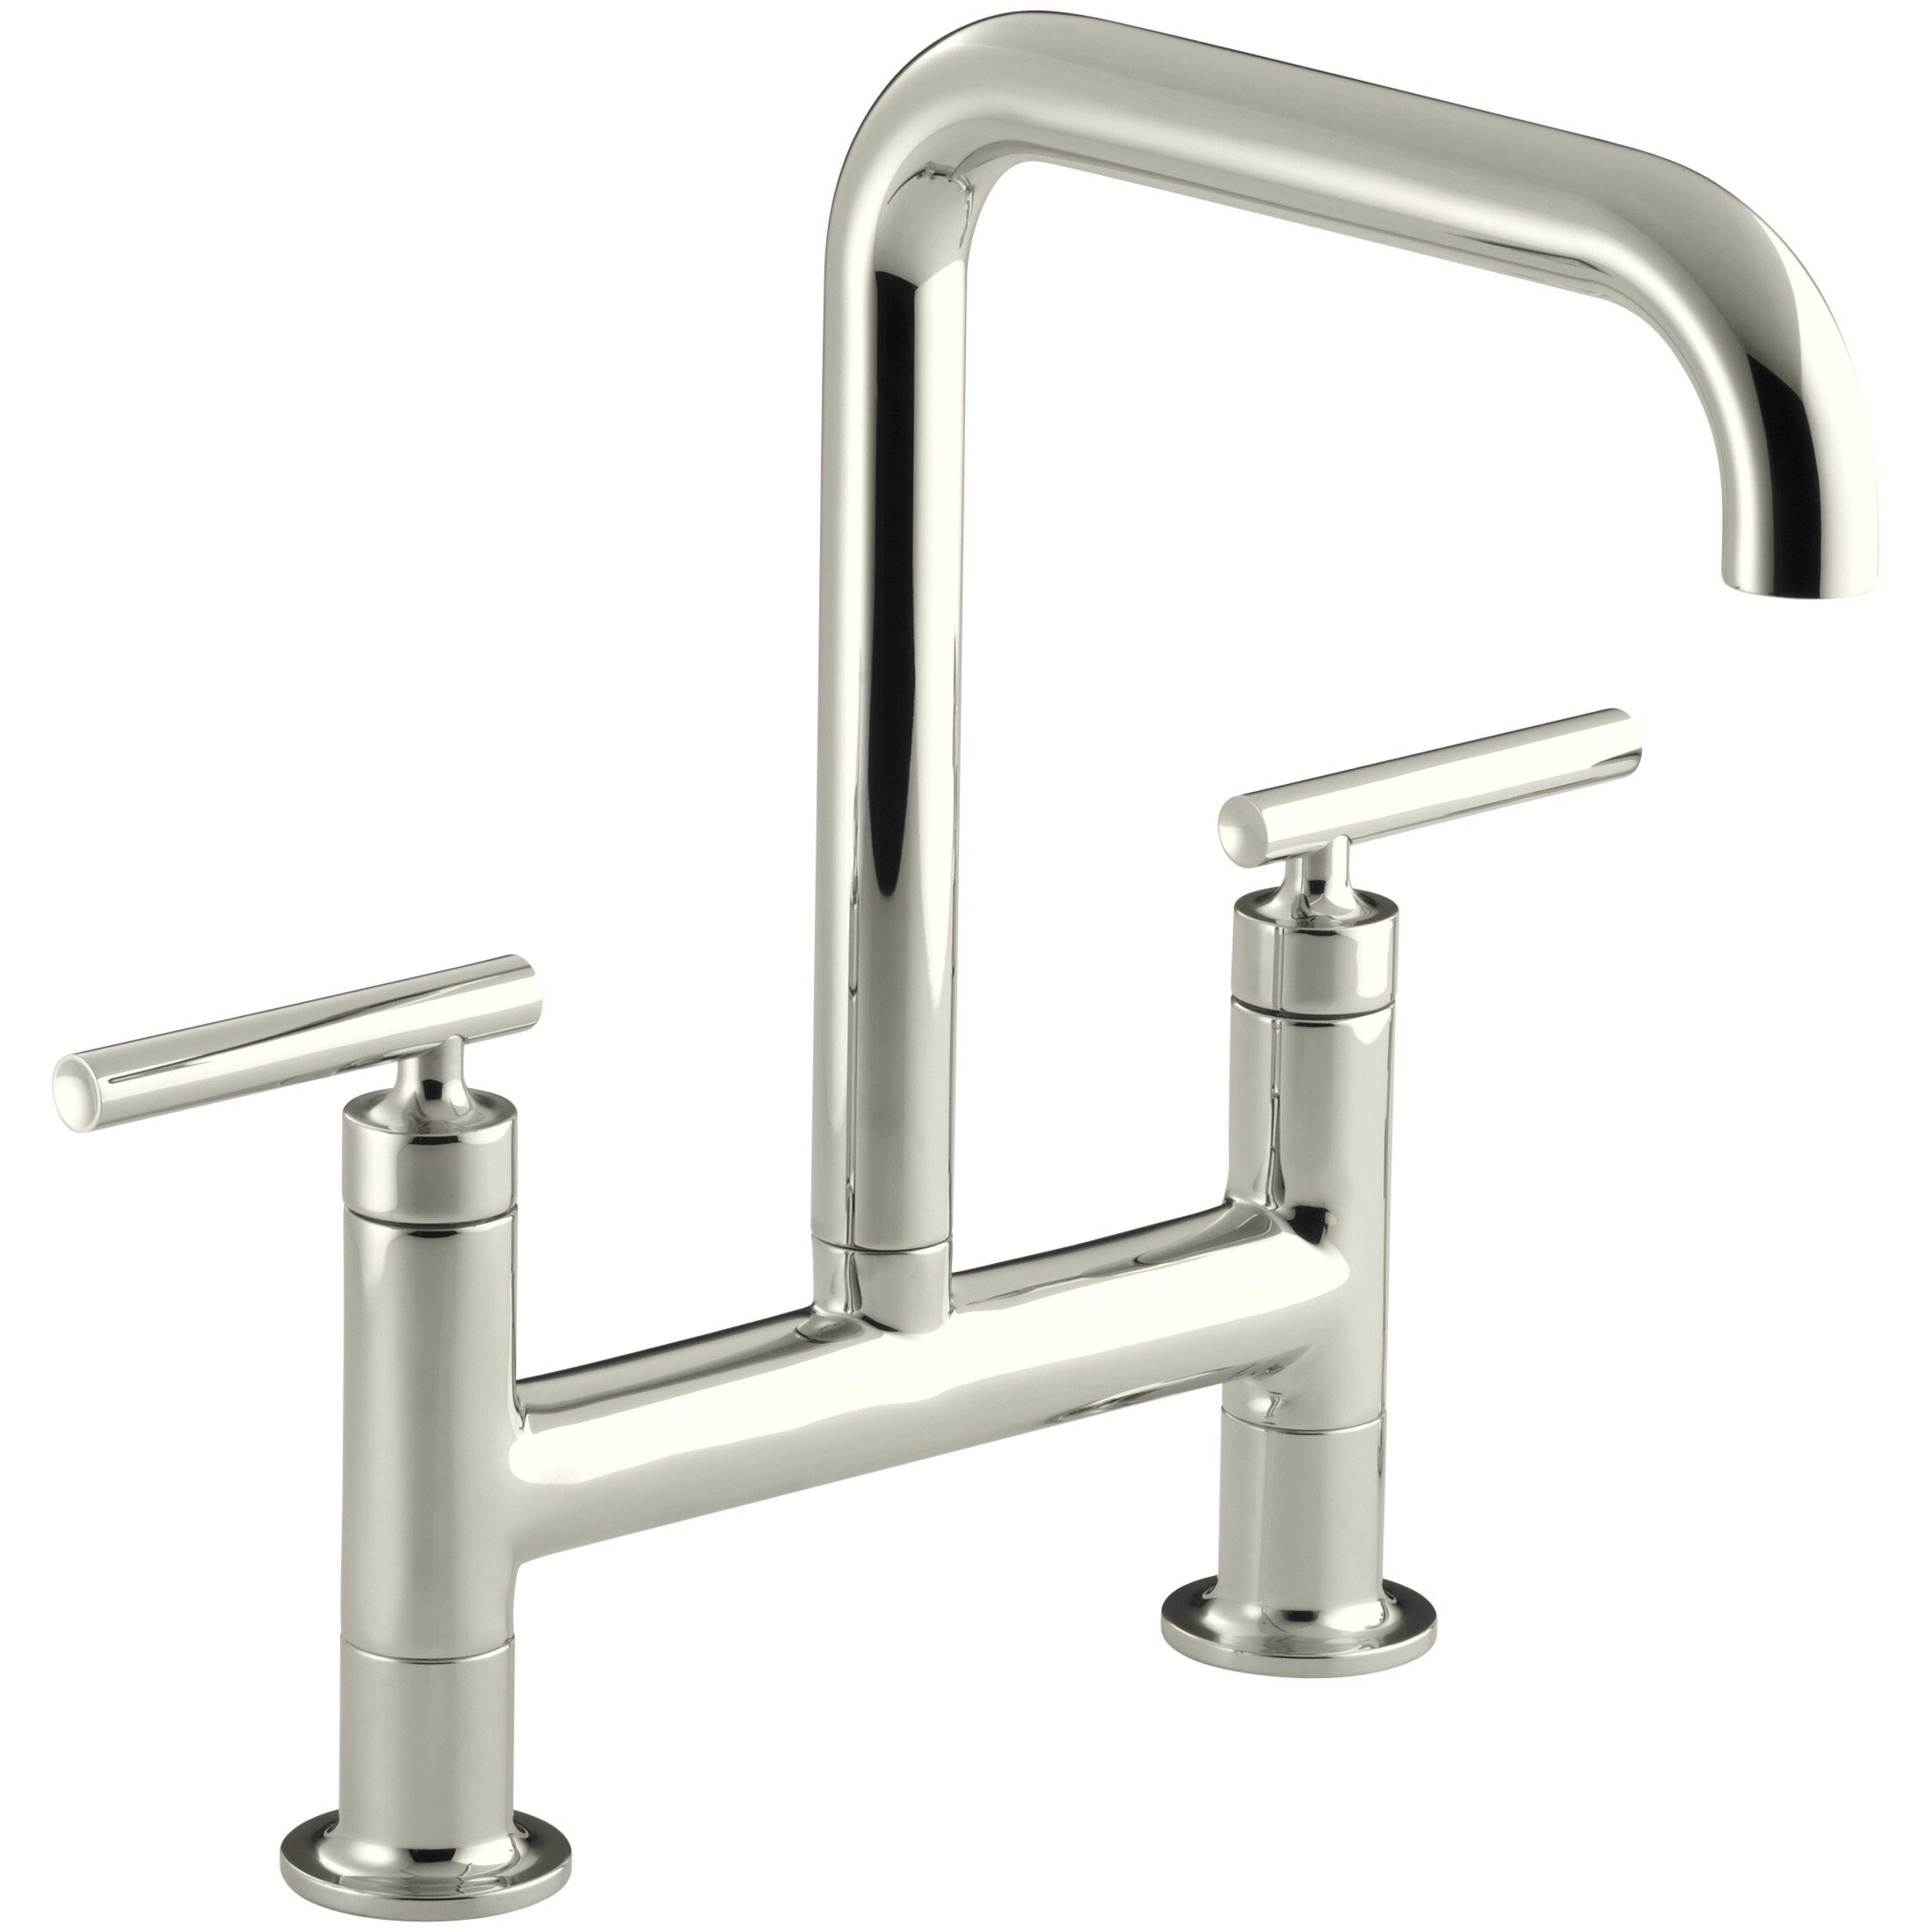 Two Hole Kitchen Faucet Moen Faucets Kitchen And Bathroom Faucet